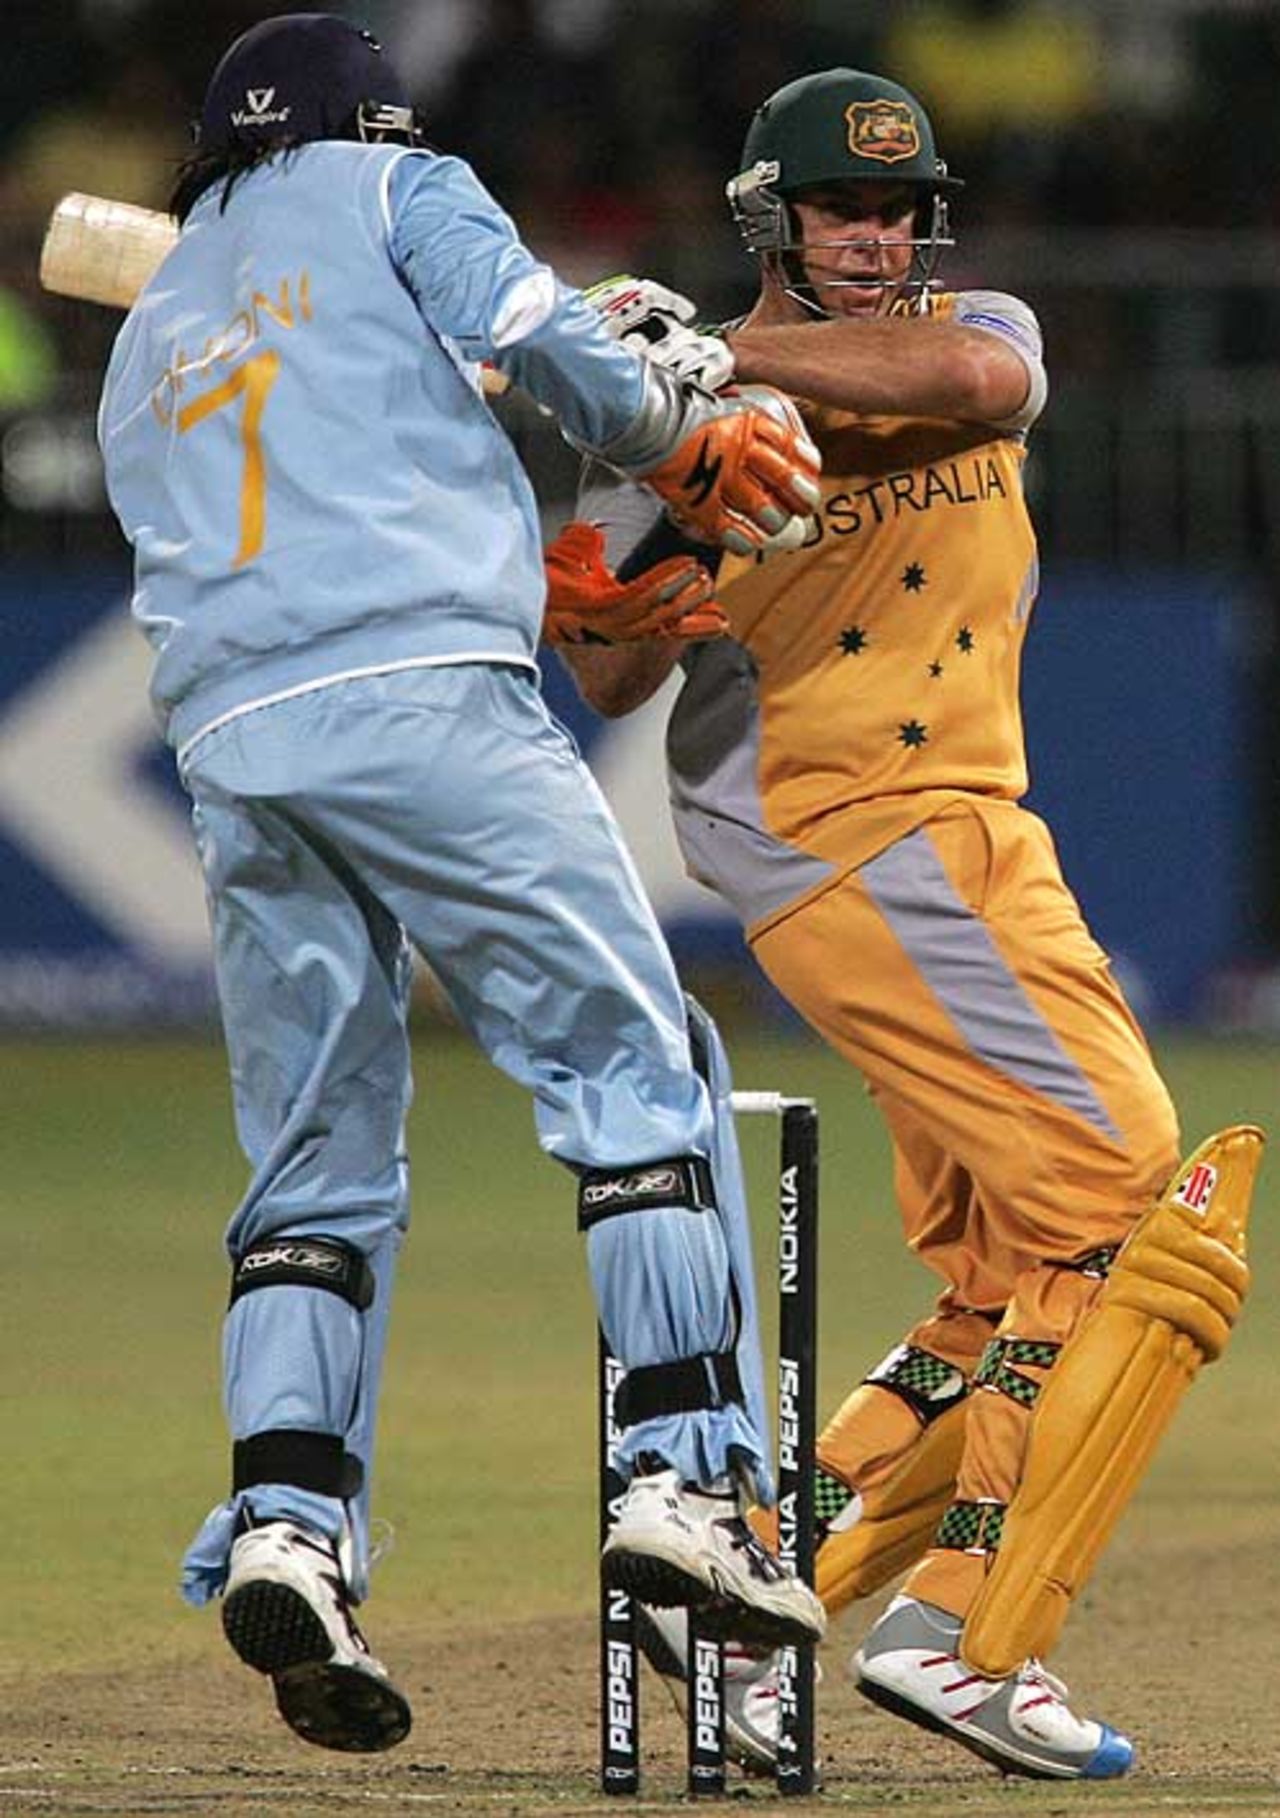 Mahendra Singh Dhoni collects the ball after Matthew Hayden misses out, Australia v India, 2nd semi-final, ICC World Twenty20, Durban, September 22, 2007